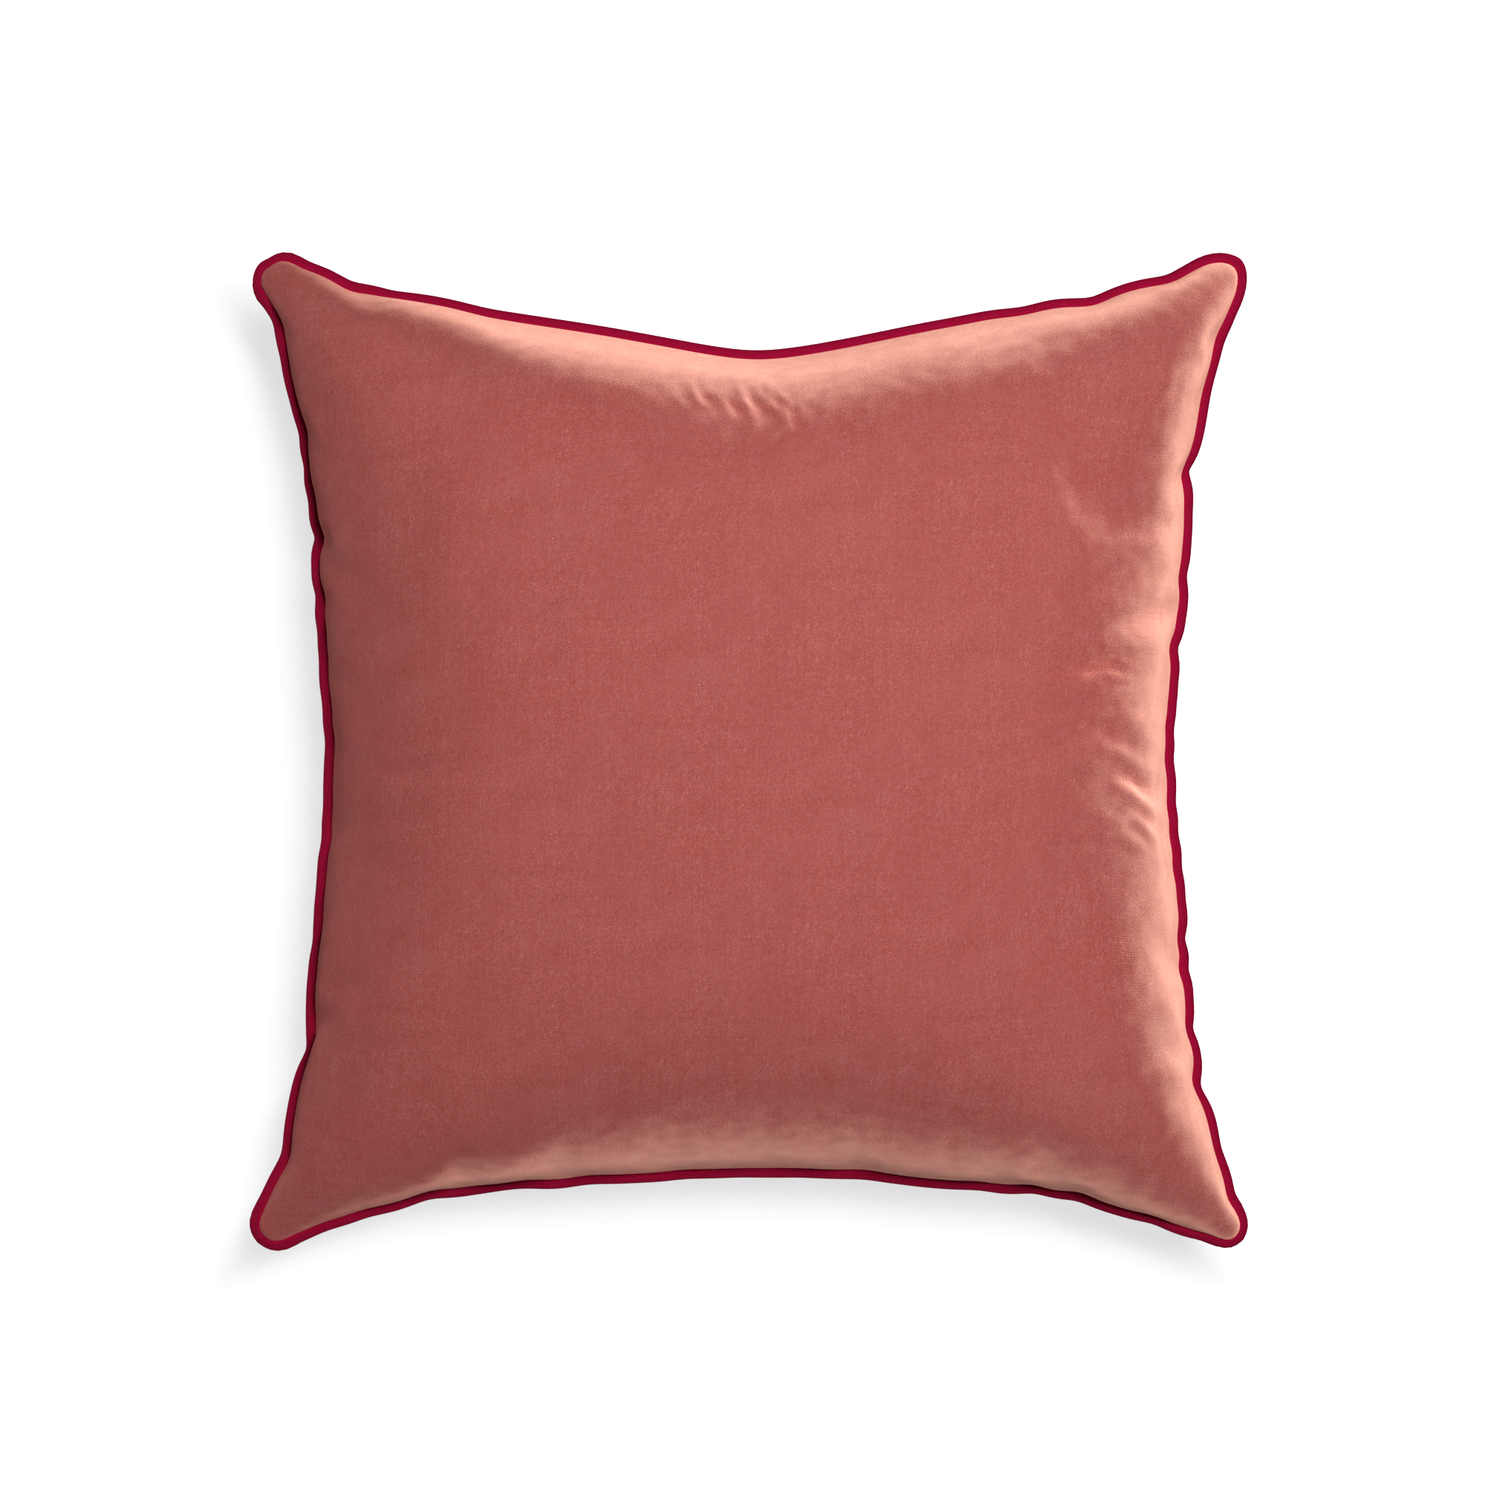 22-square cosmo velvet custom coralpillow with raspberry piping on white background